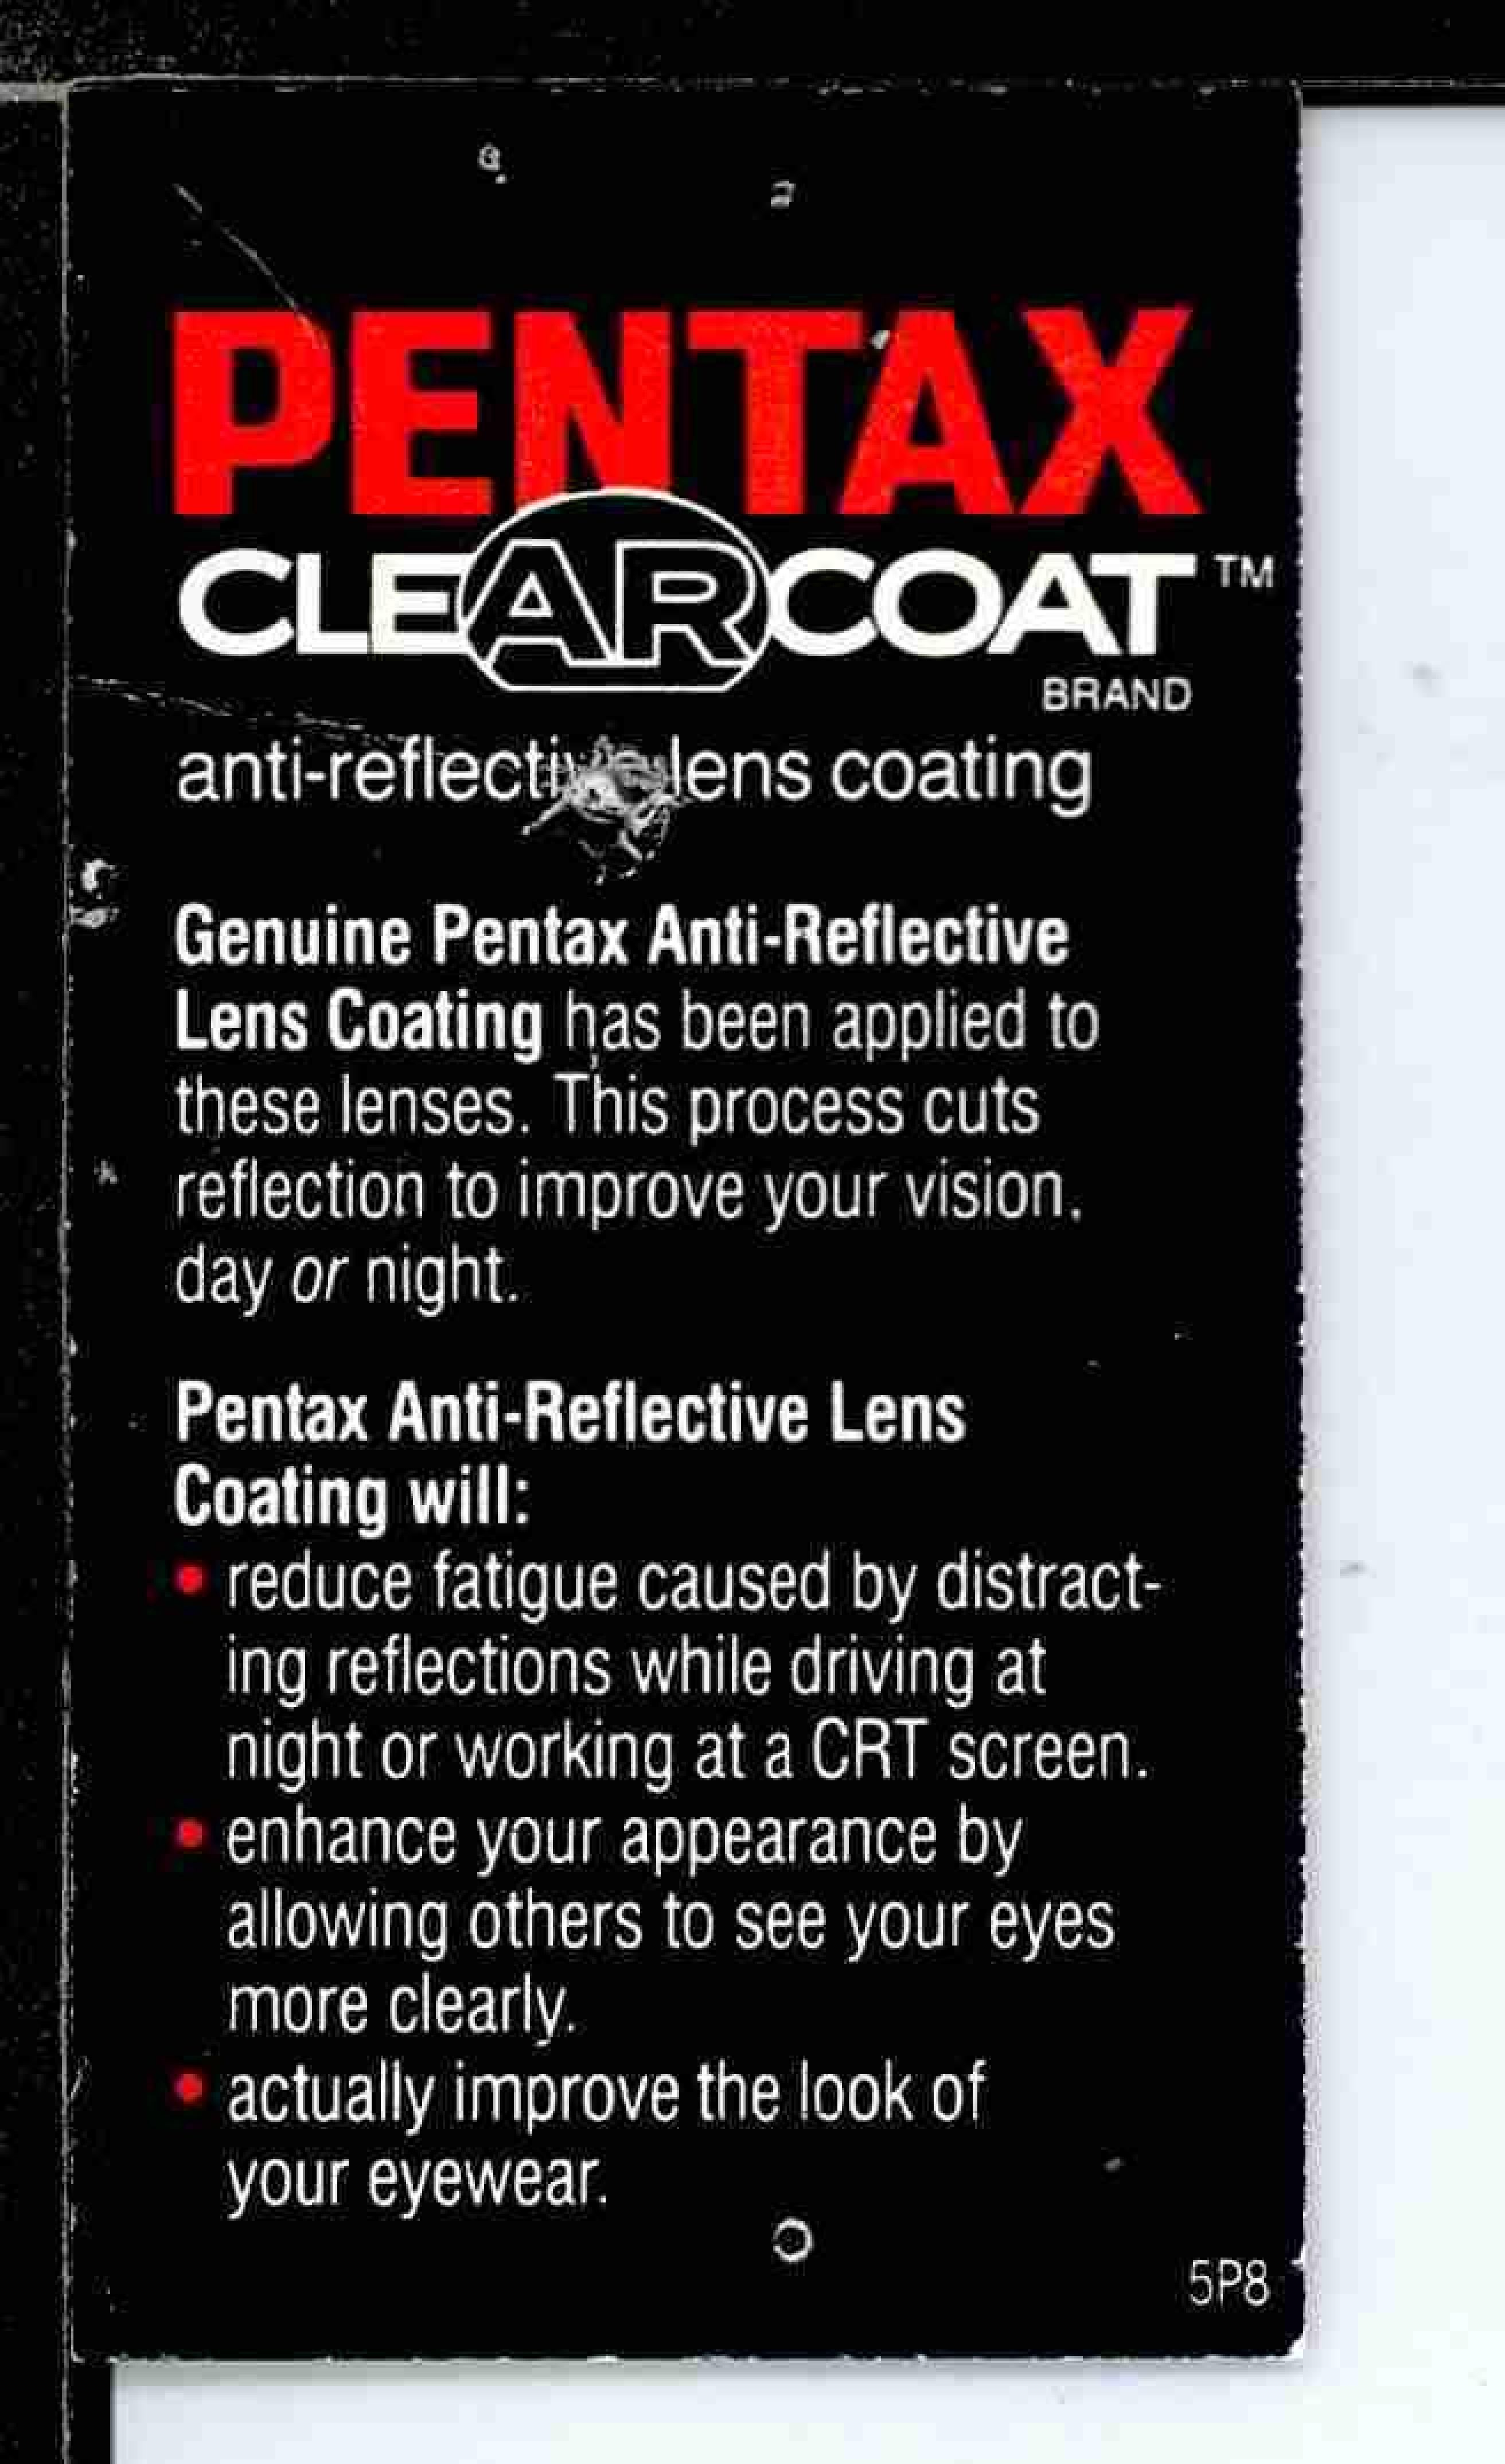  PENTAX CLEARCOAT